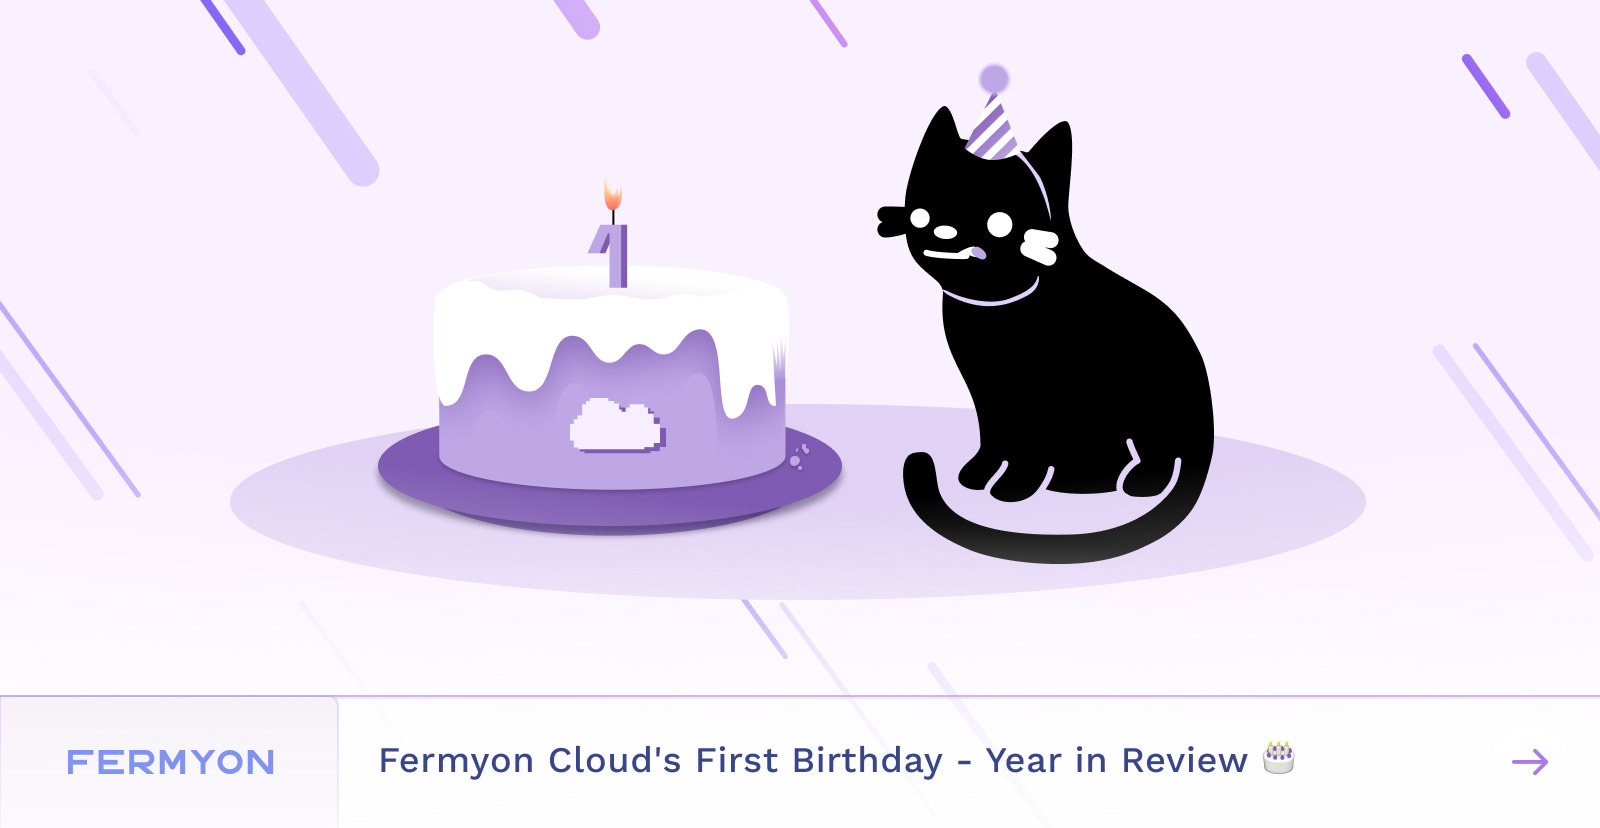 Fermyon Cloud's First Birthday - Year in Review 🎂